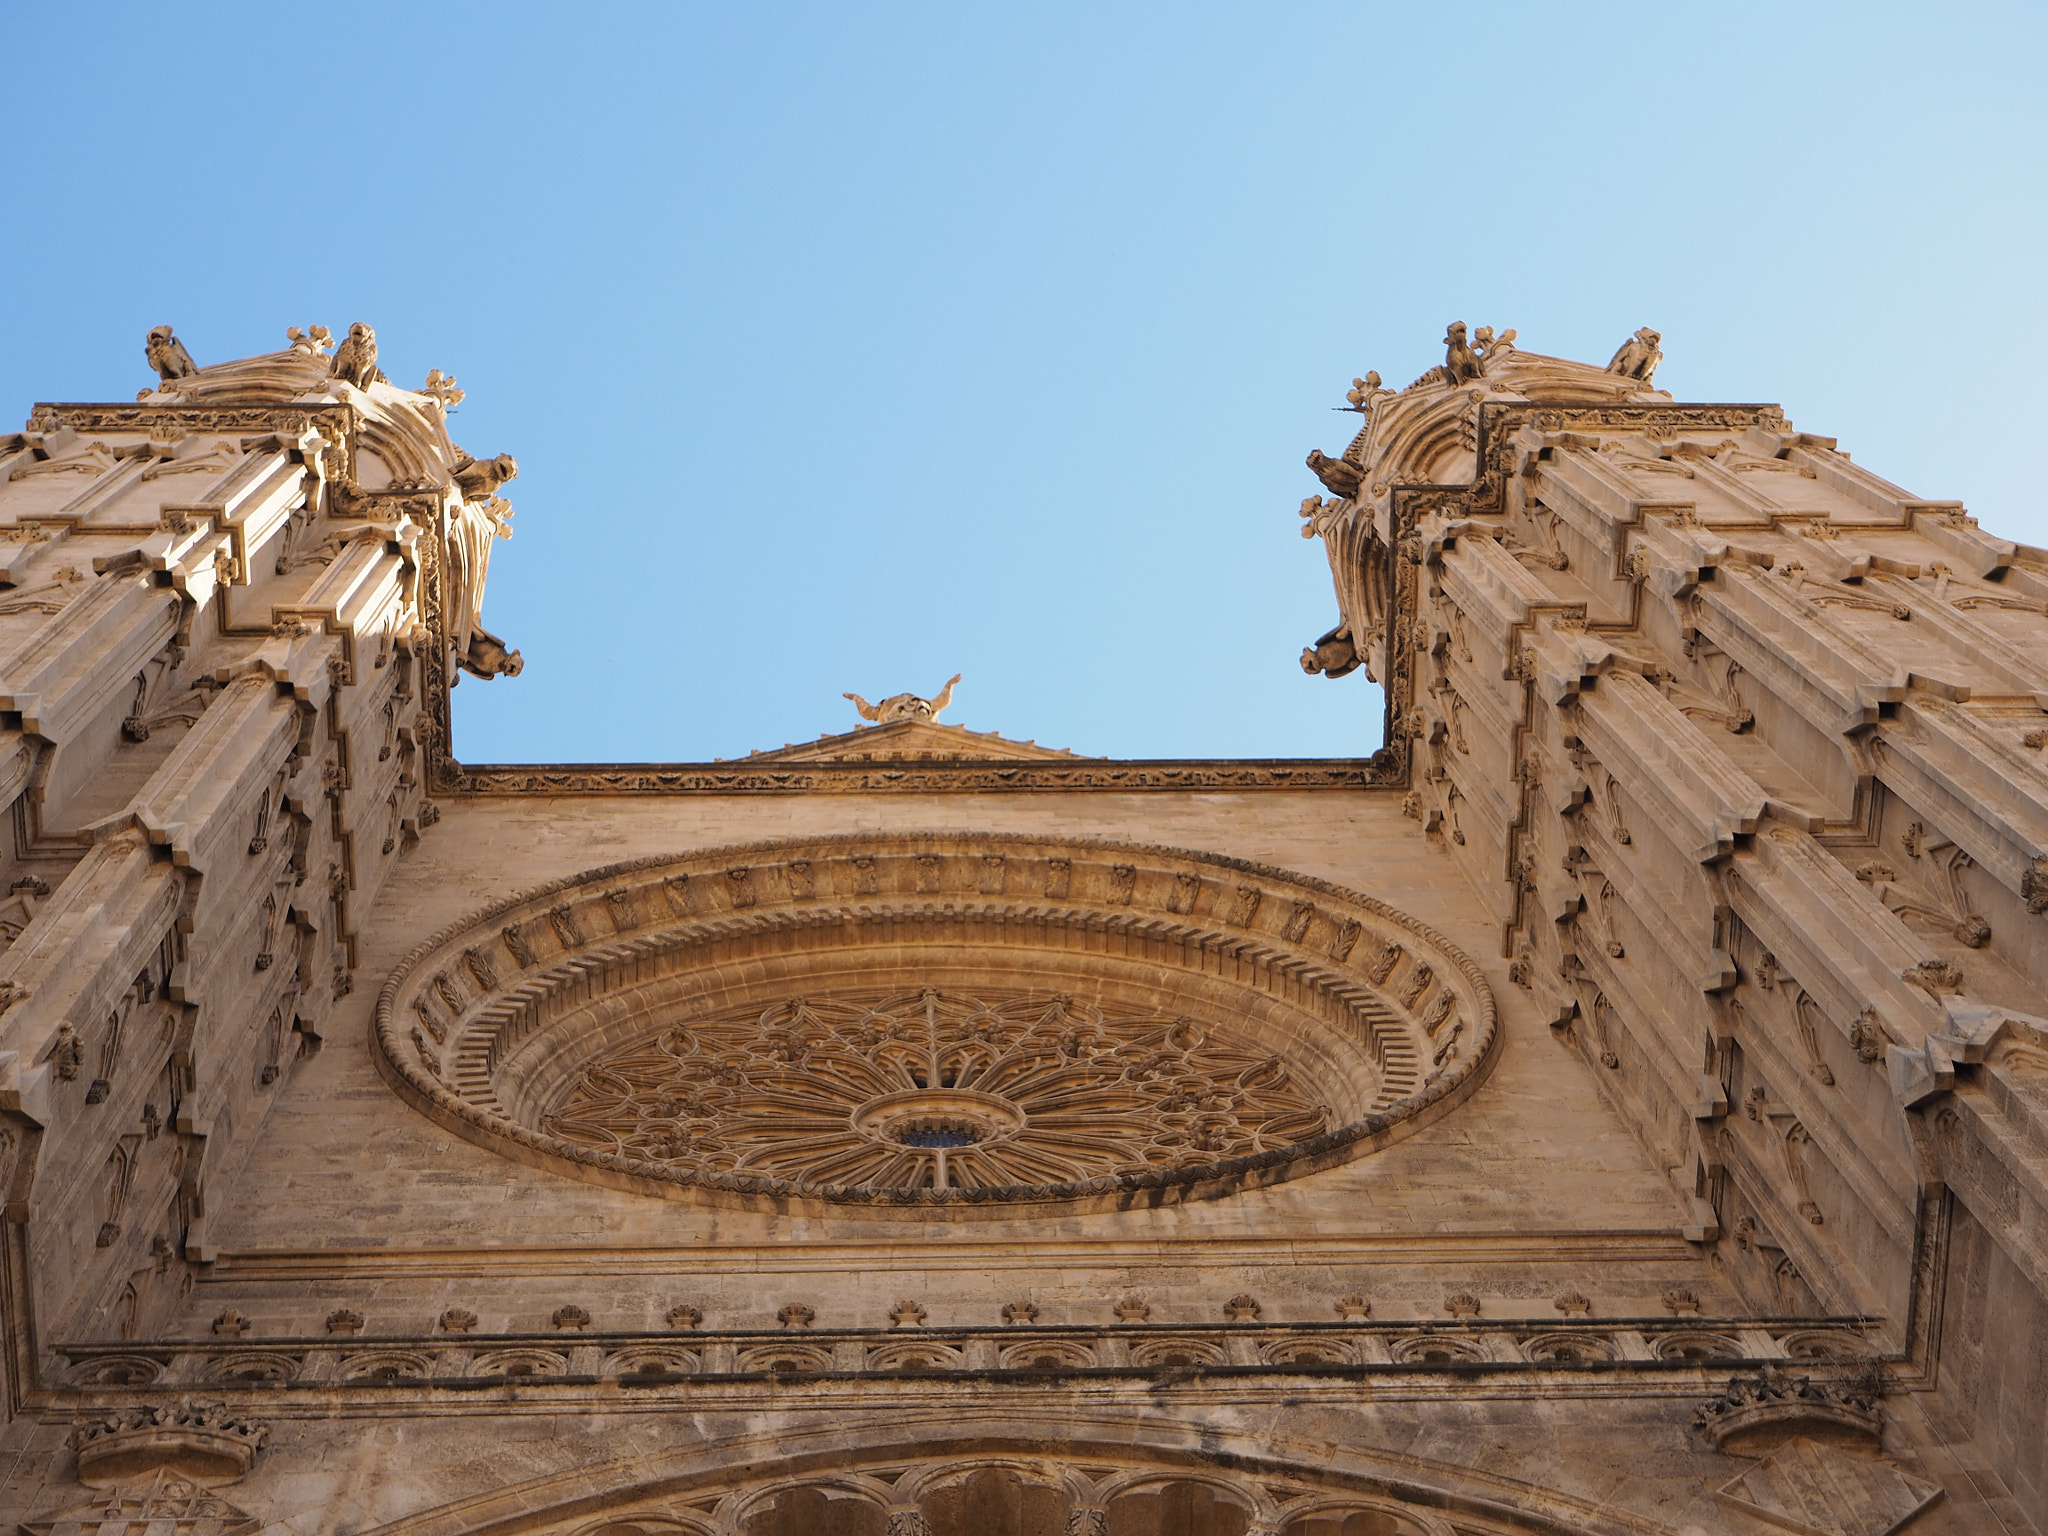 Olympus OM-D E-M10 II sample photo. Cathedral in palma, mallorca, spain photography